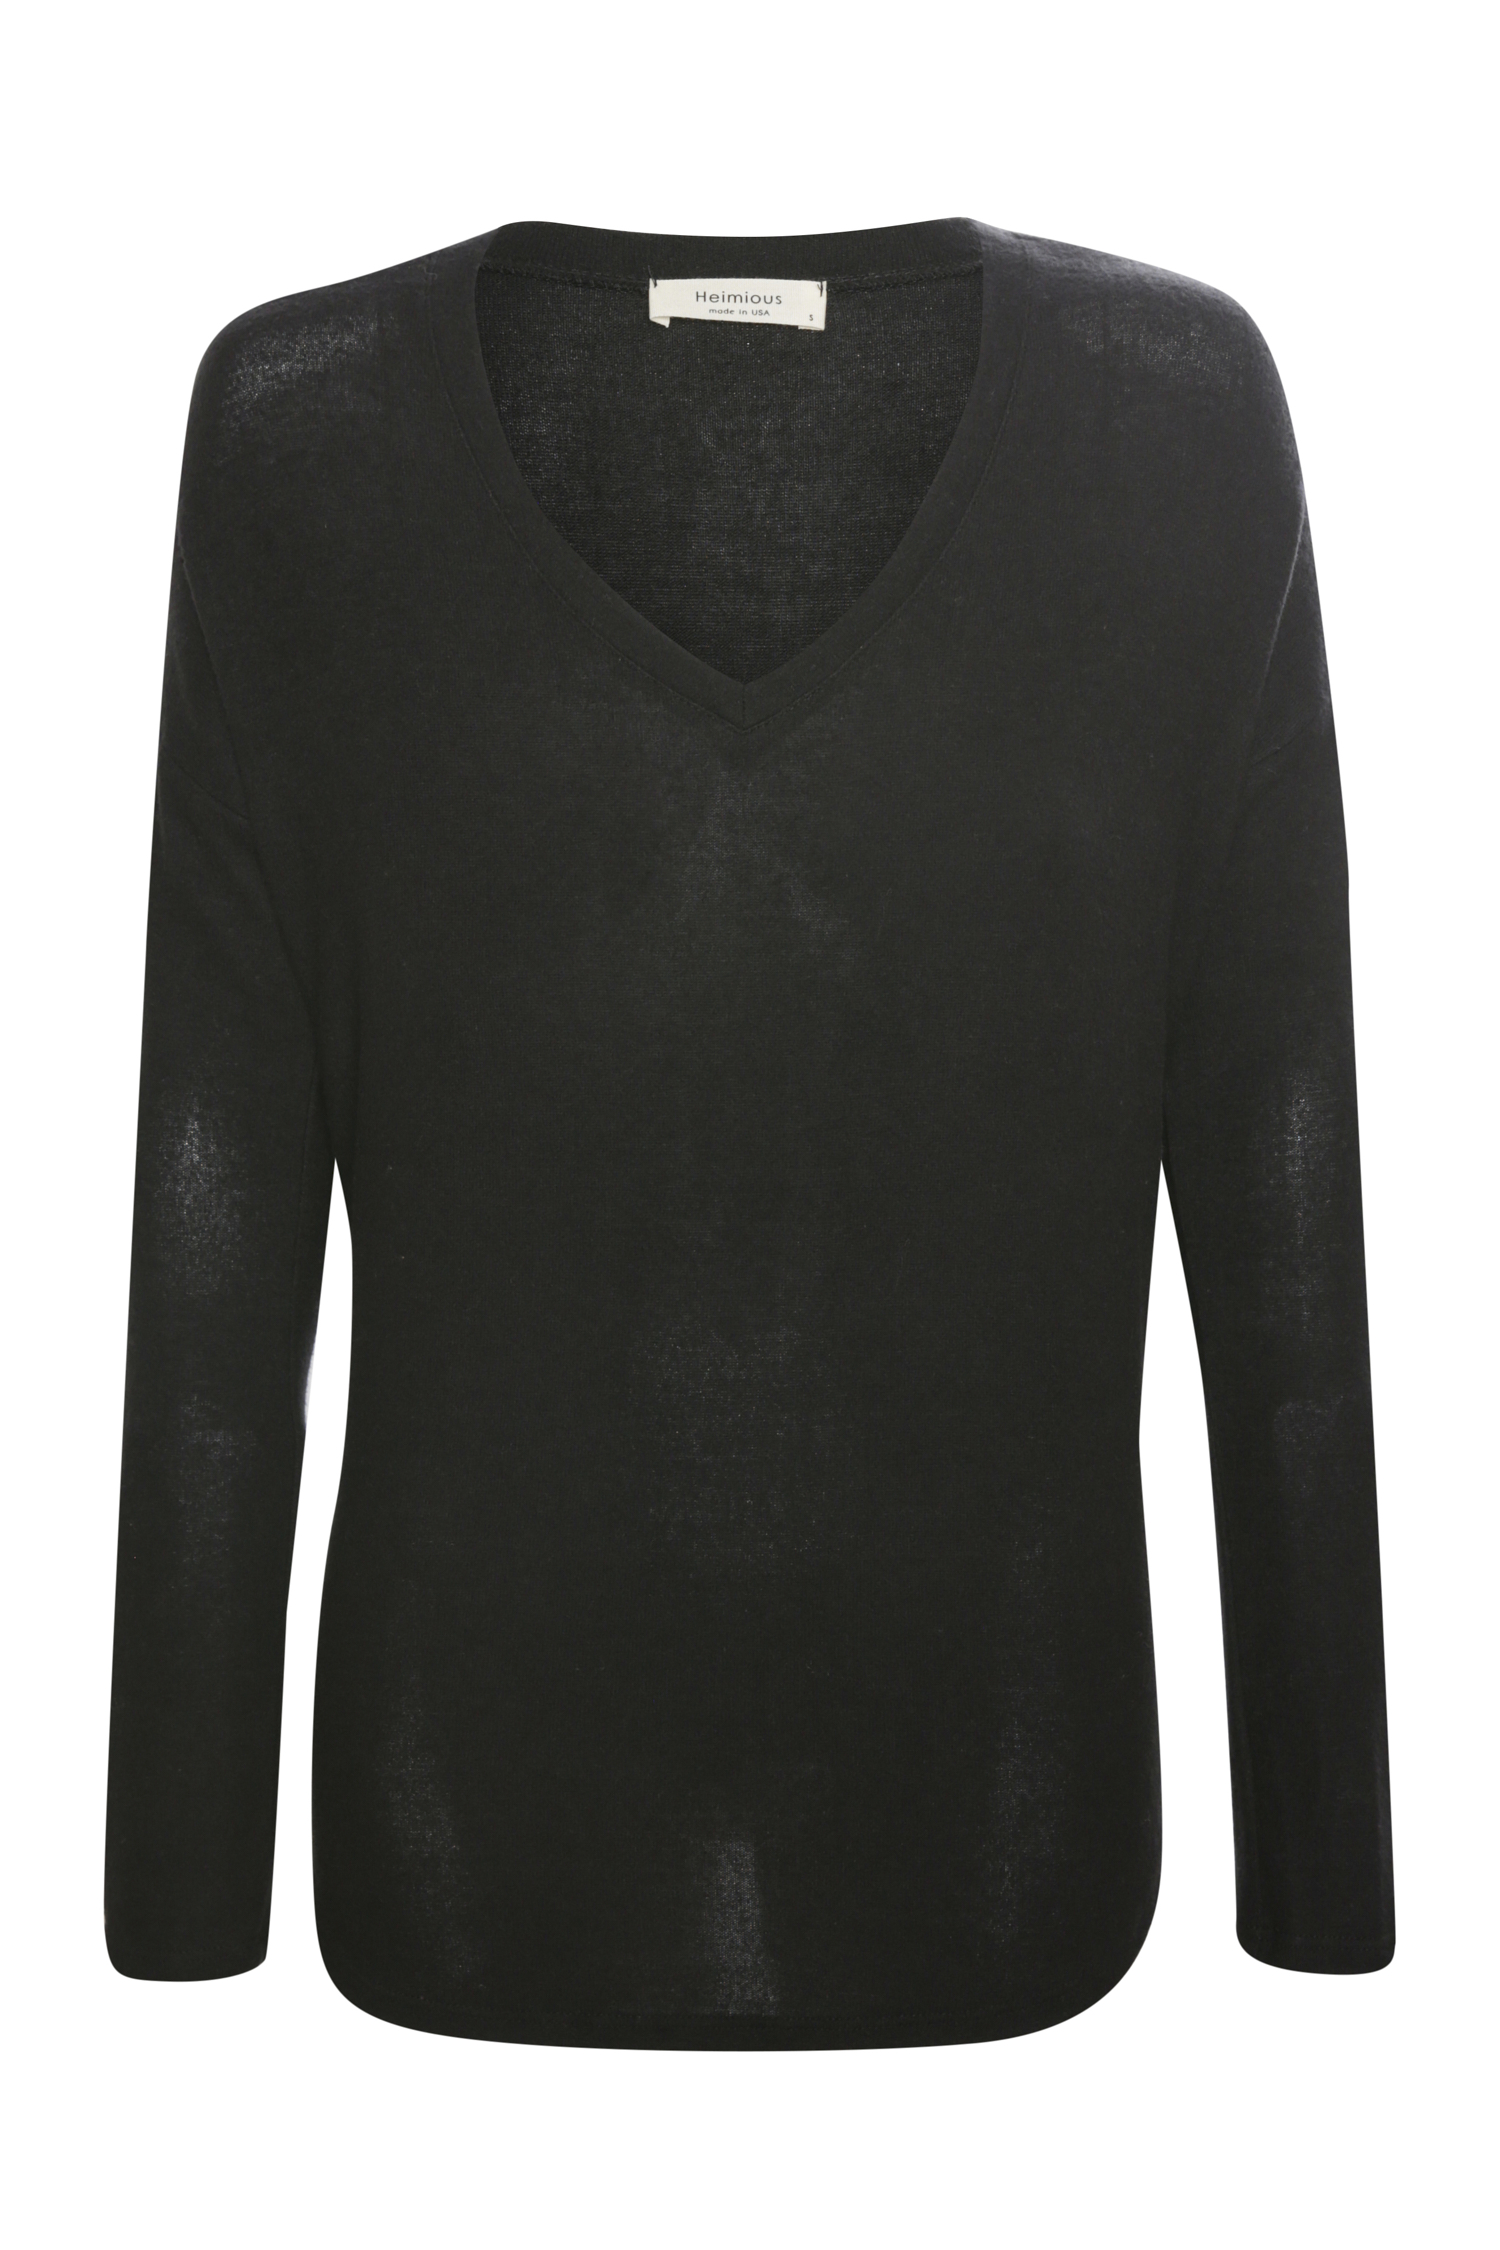 Via Brushed Dropped Shoulder Top in Black XS - XL | DAILYLOOK